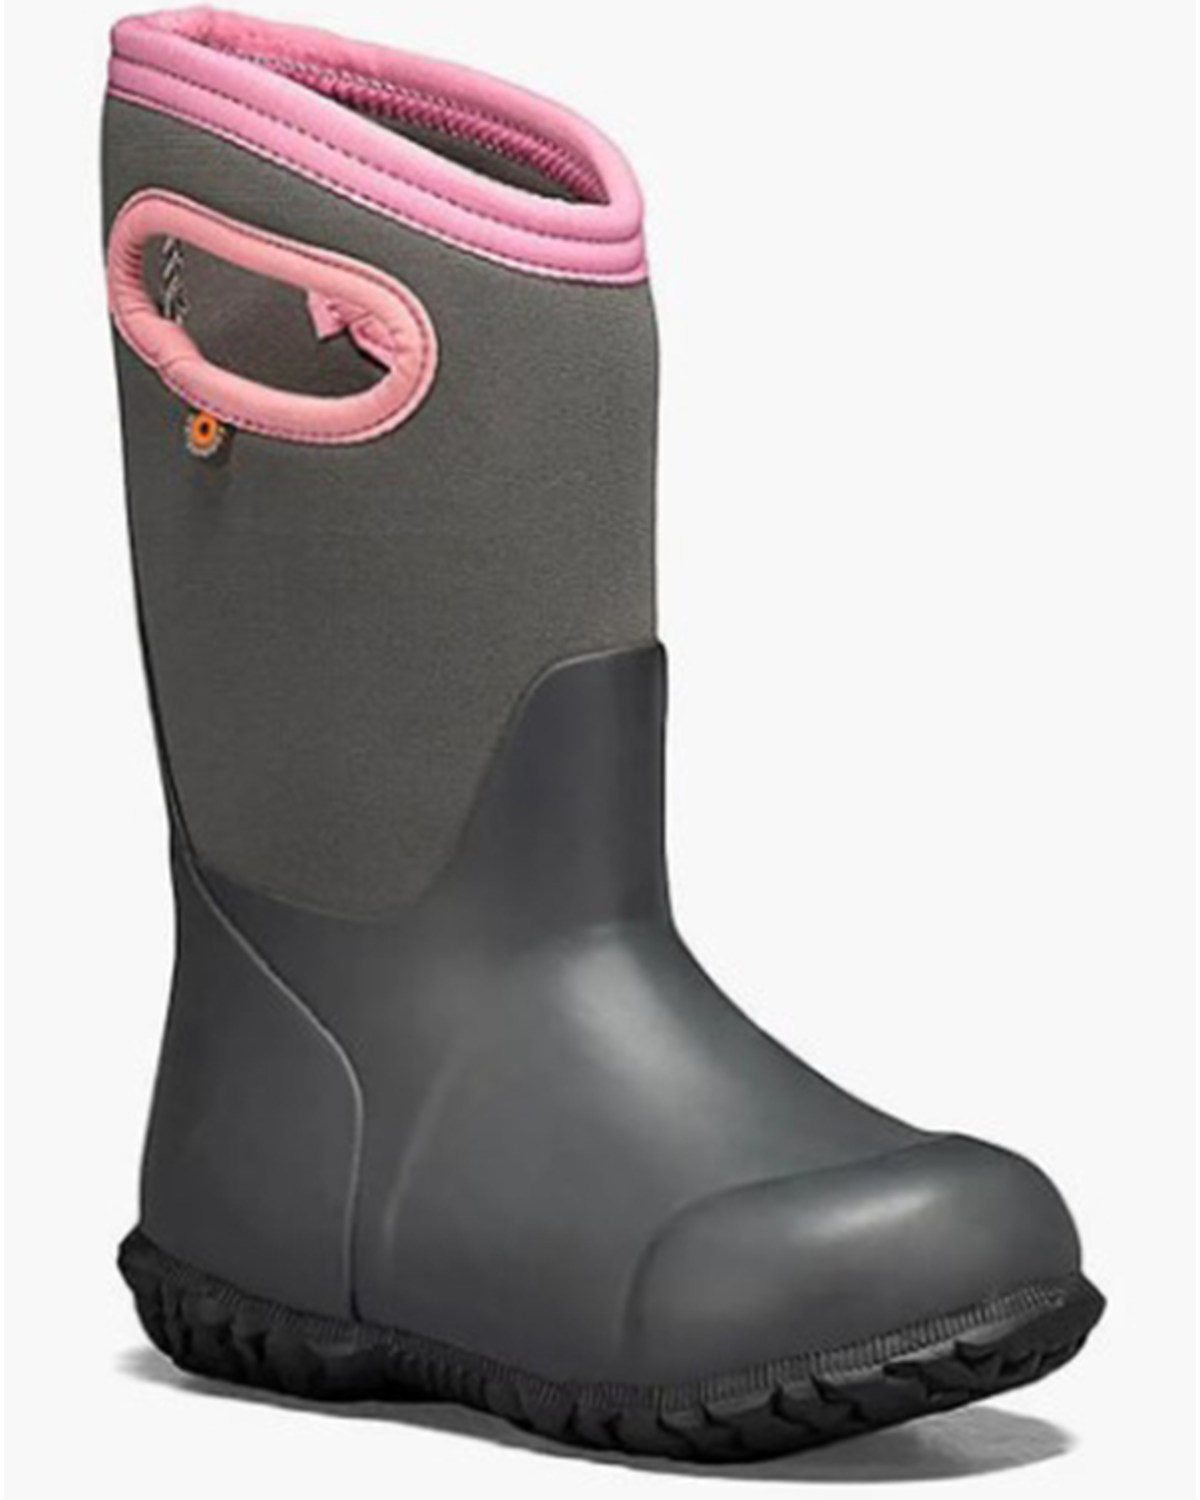 Bogs Toddler Boys' York Solid Rain Boots - Round Toe